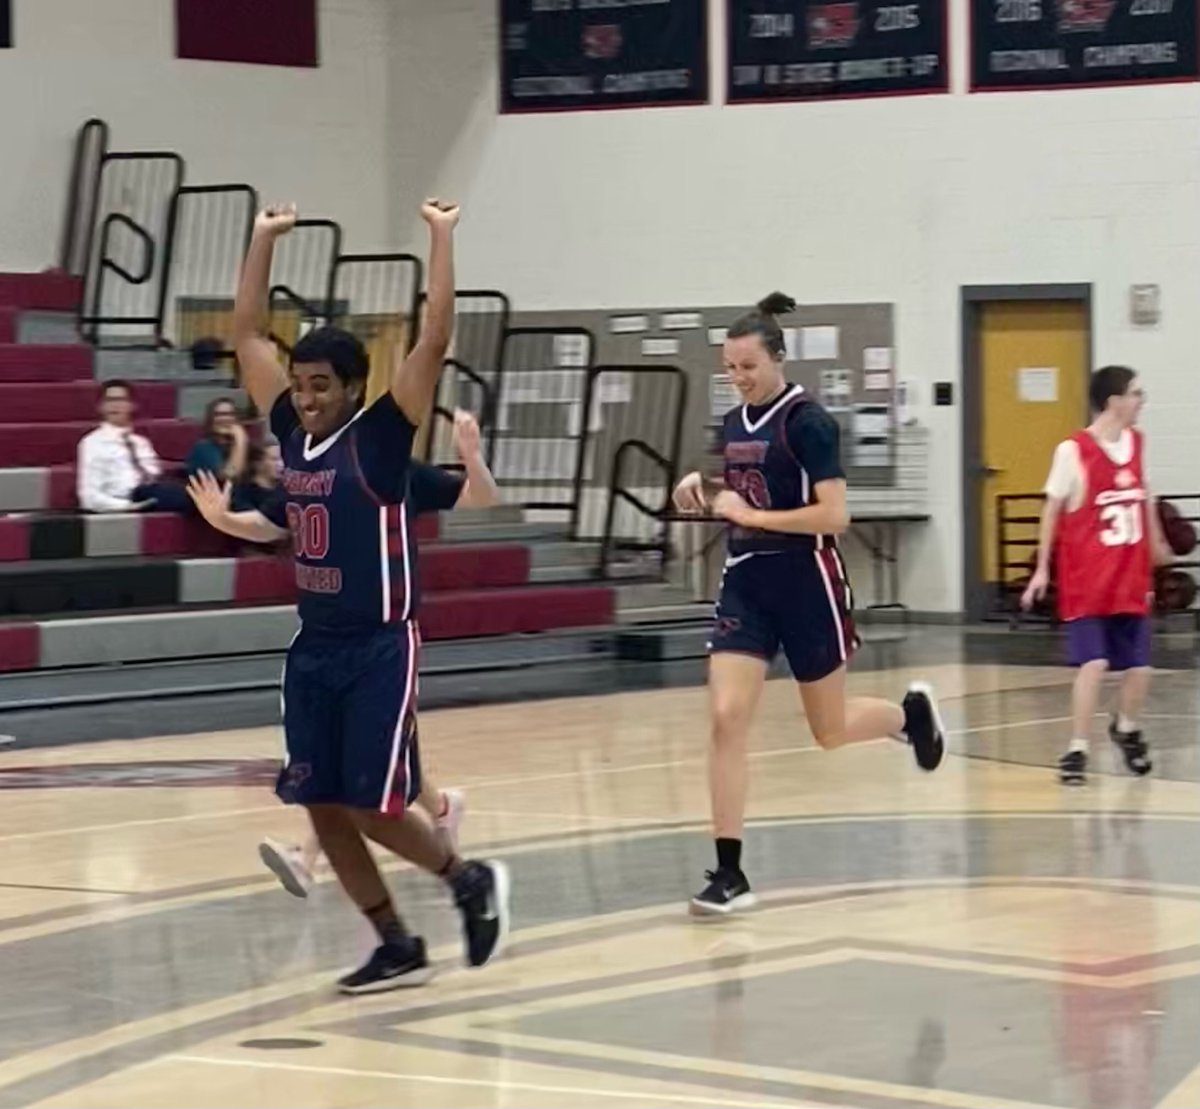 Great game tonight against Combs Coyotes. Thank you for hosting. Congratulations Pumas on the “W”!! 🏀⛹🏼🐾#liveunified #playunified @perry_pumas @PerryPumas07 @ChandlerUnified @CUSDAthletics